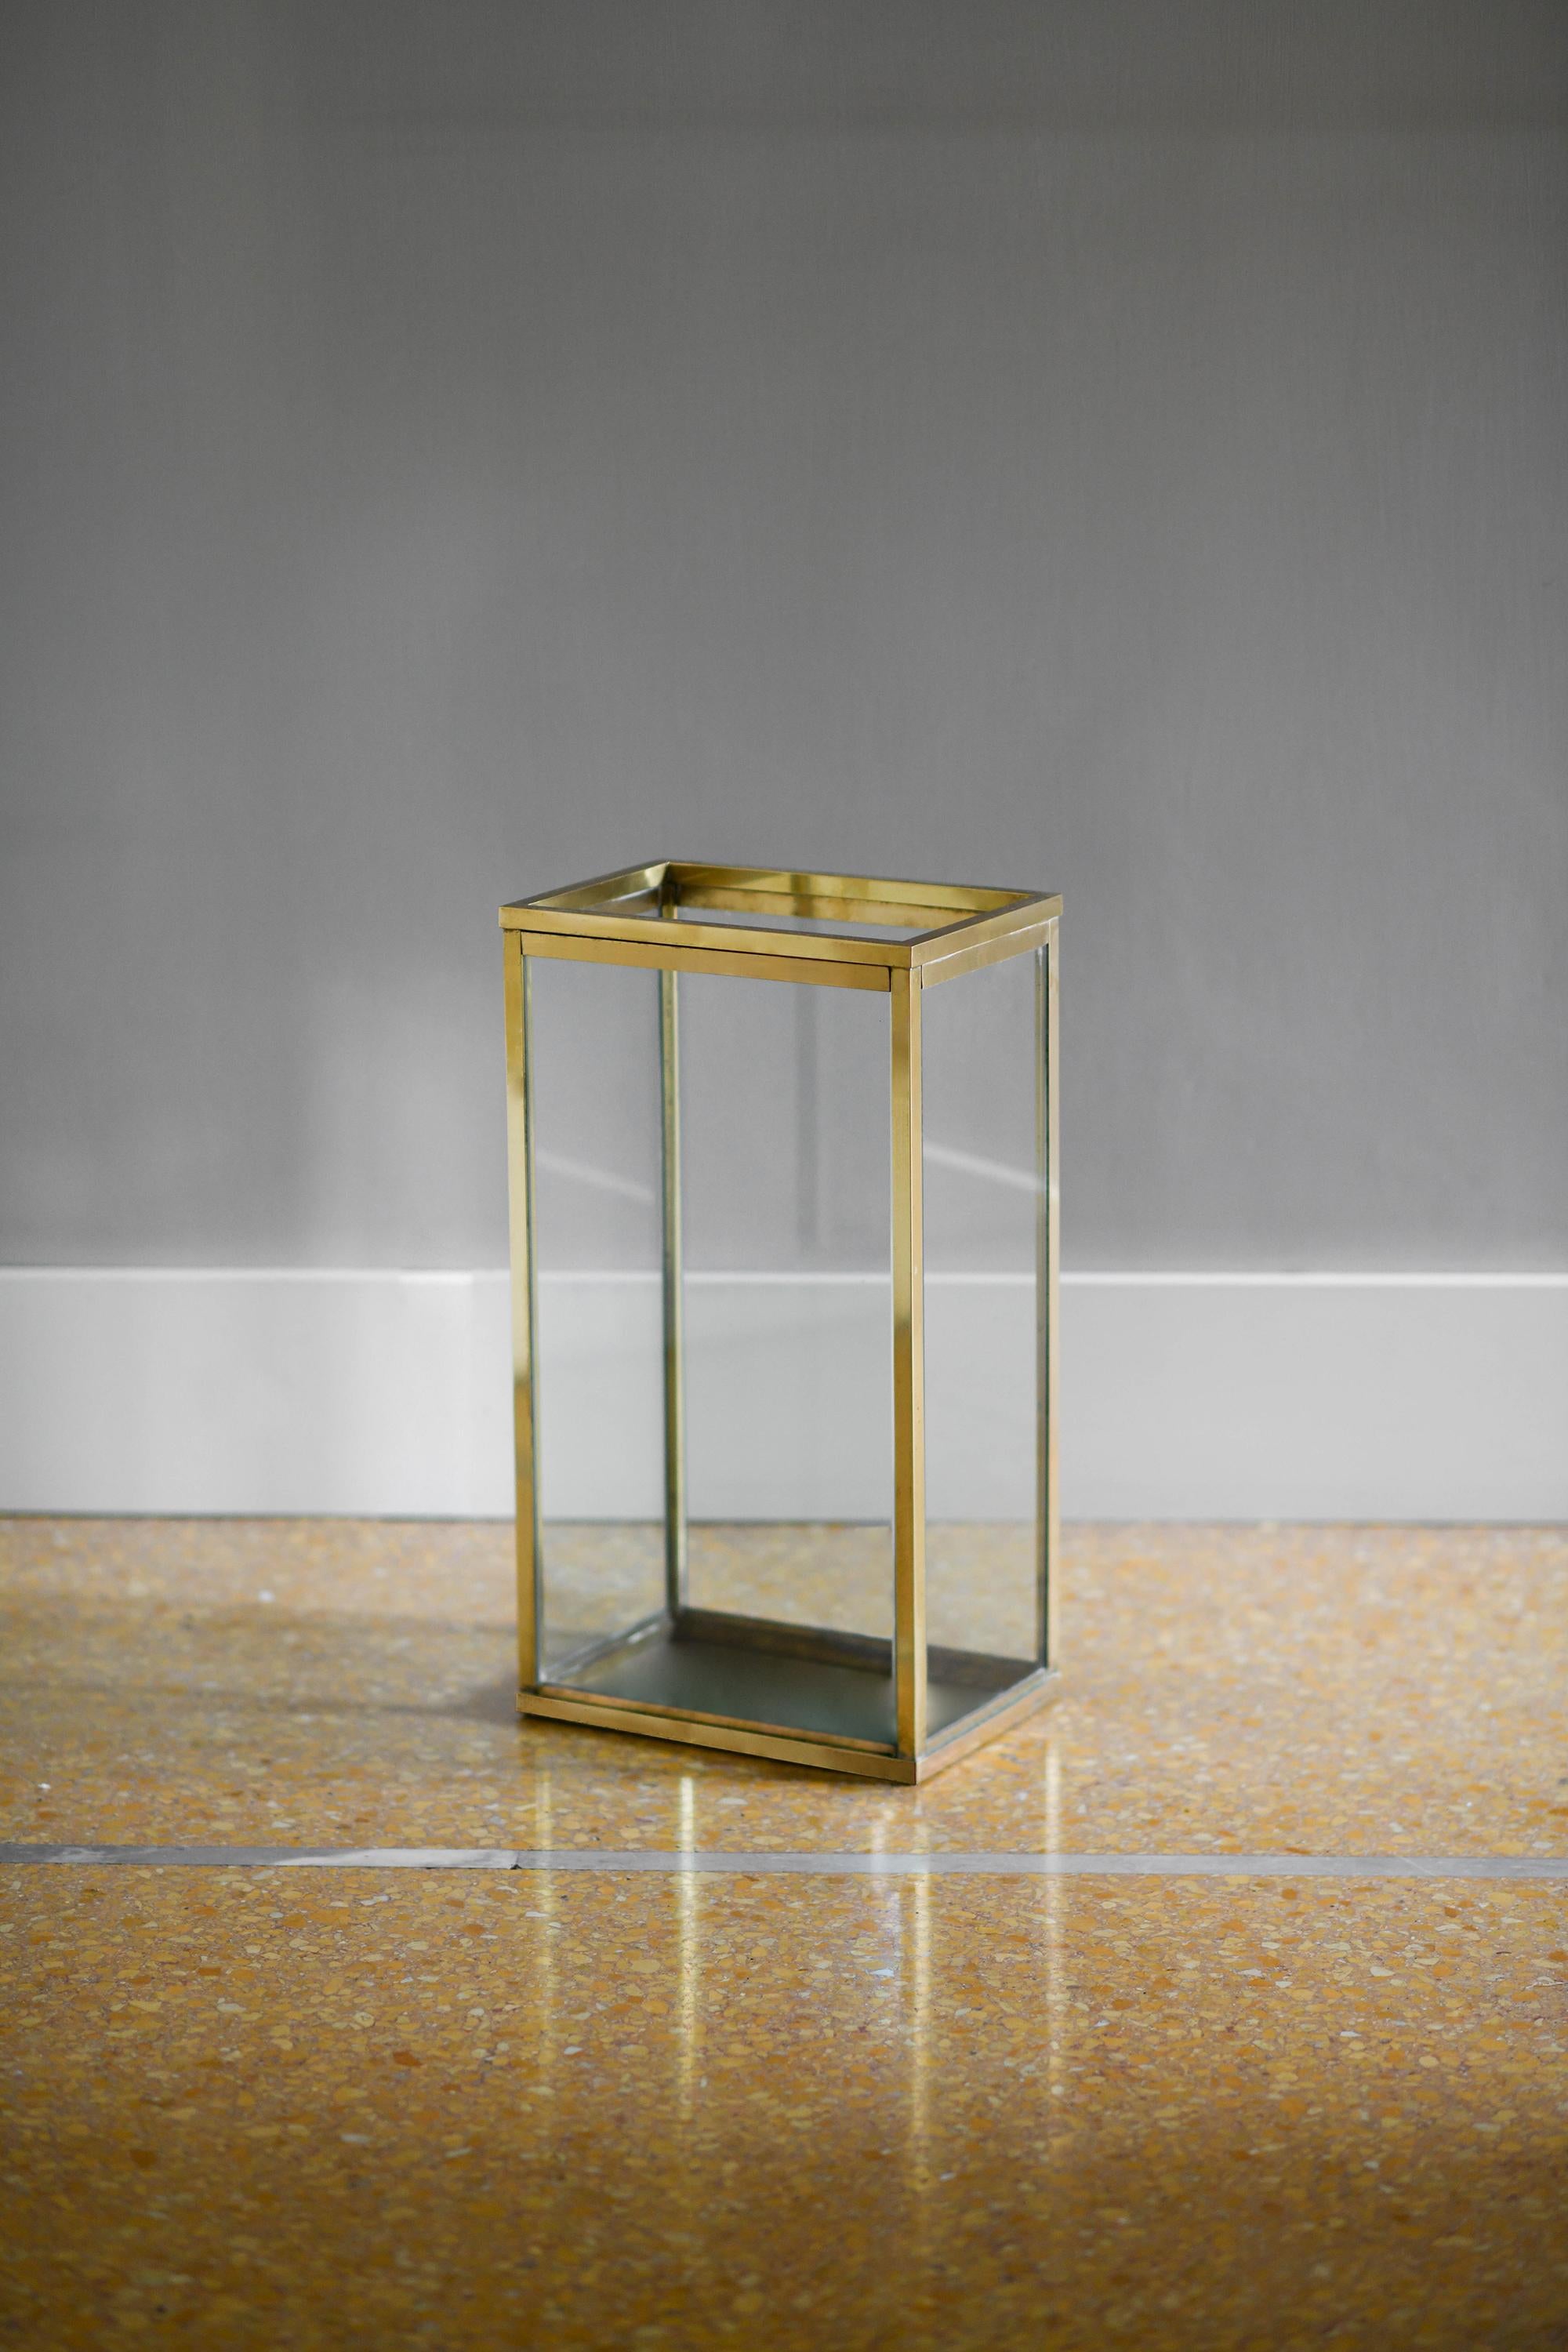 1970s Glass and Brass Umbrella stand
Product Details
Dimensions: 30L x 54H x 20D cm
Italian production from the 70s.